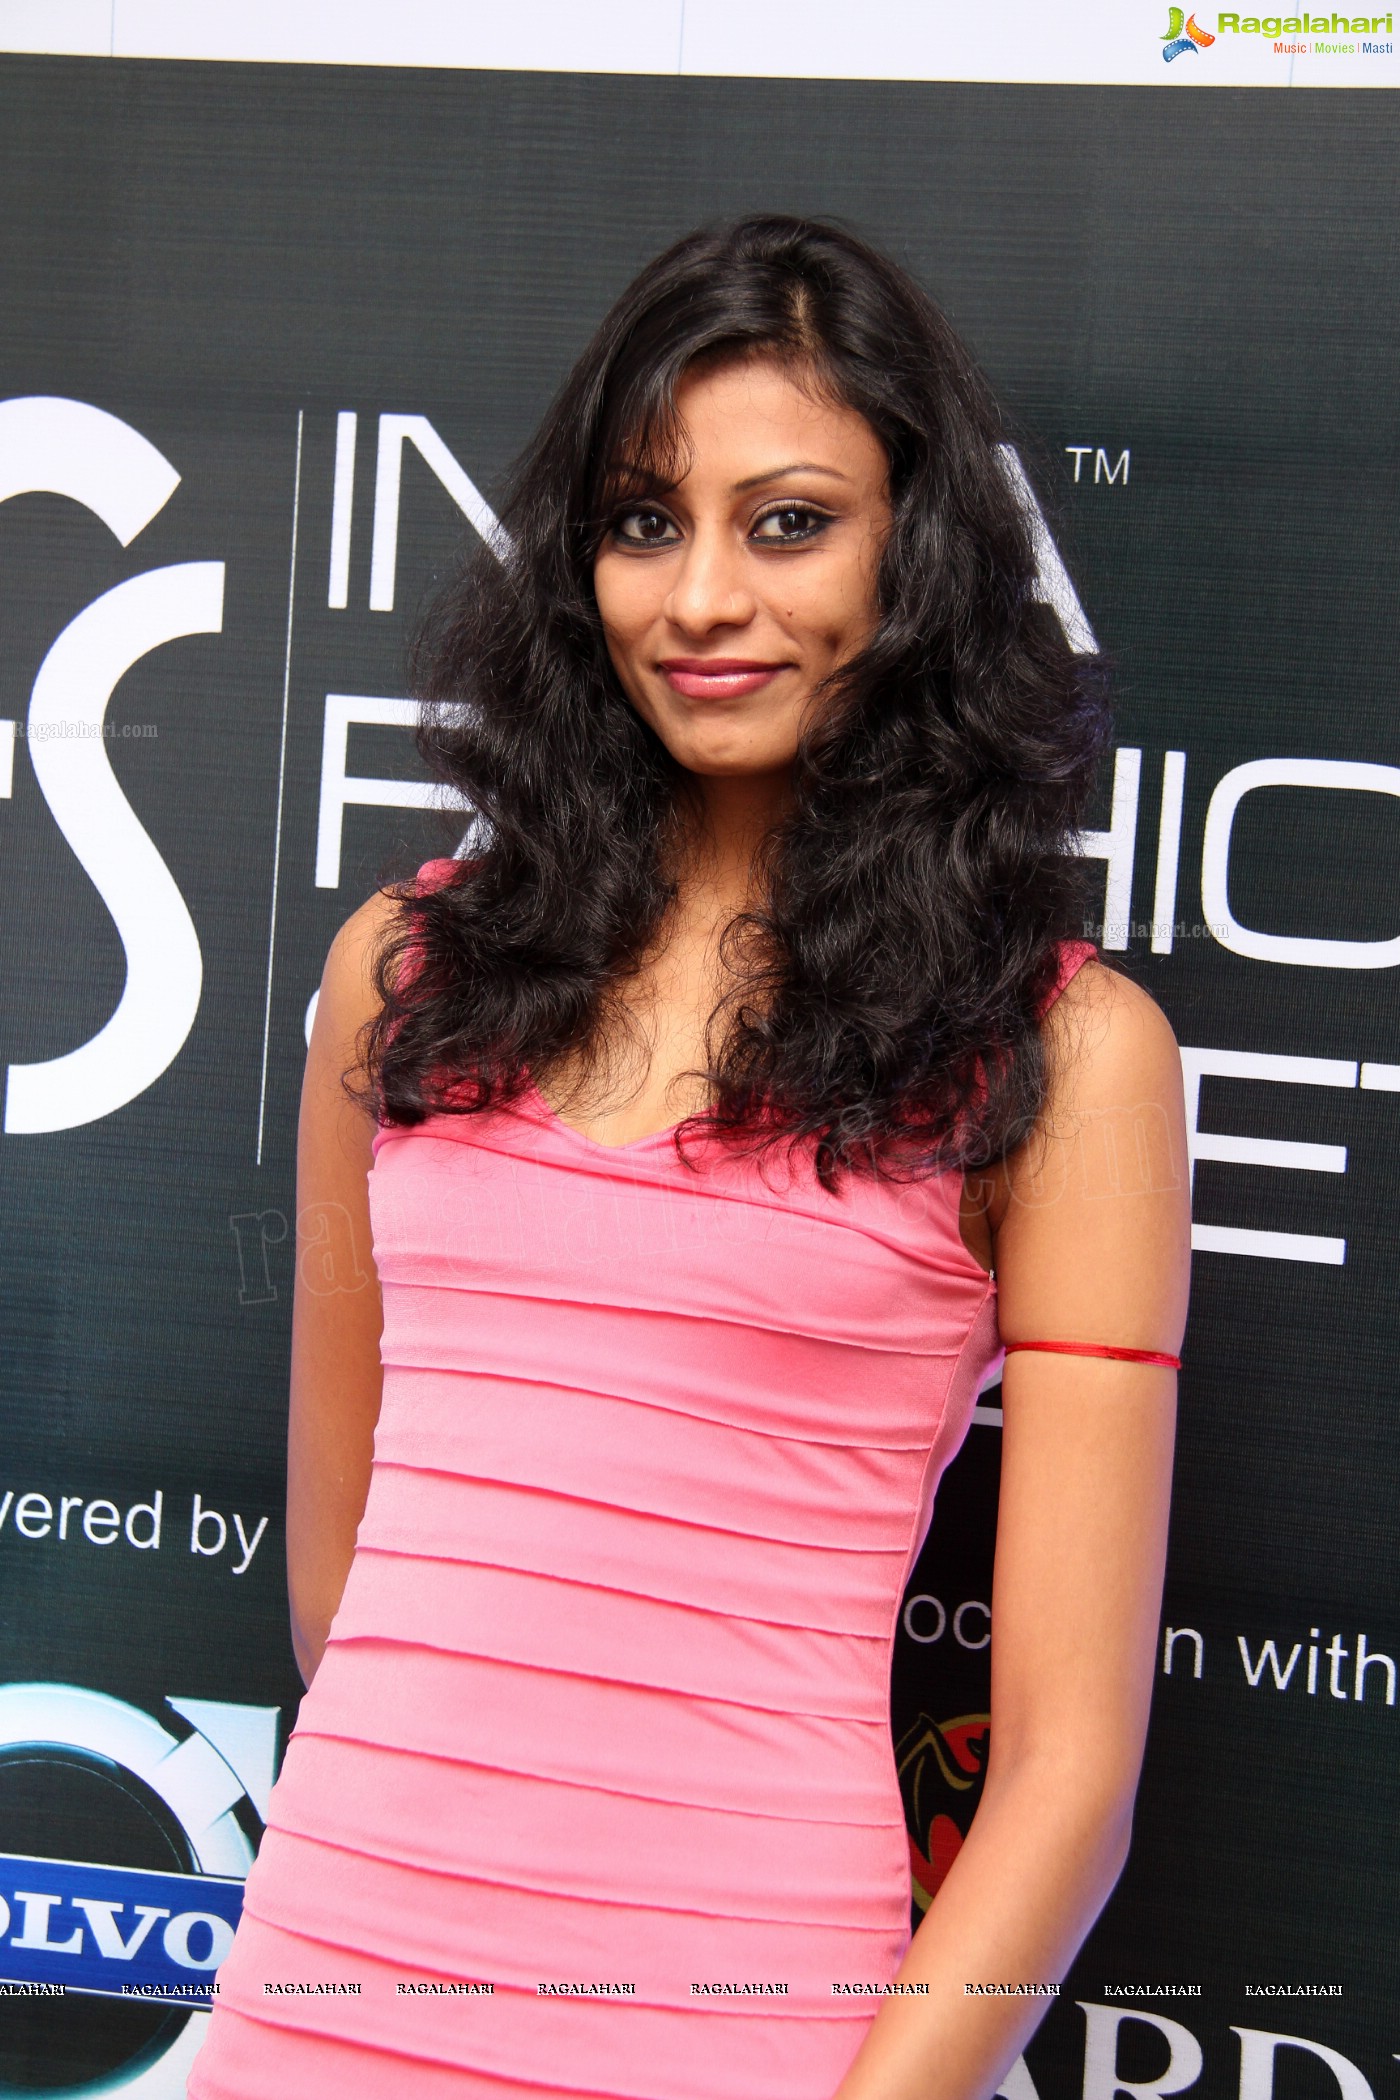 India Fashion Street (IFS) Season 2 Cocktail Party at The Park, Hyderabad